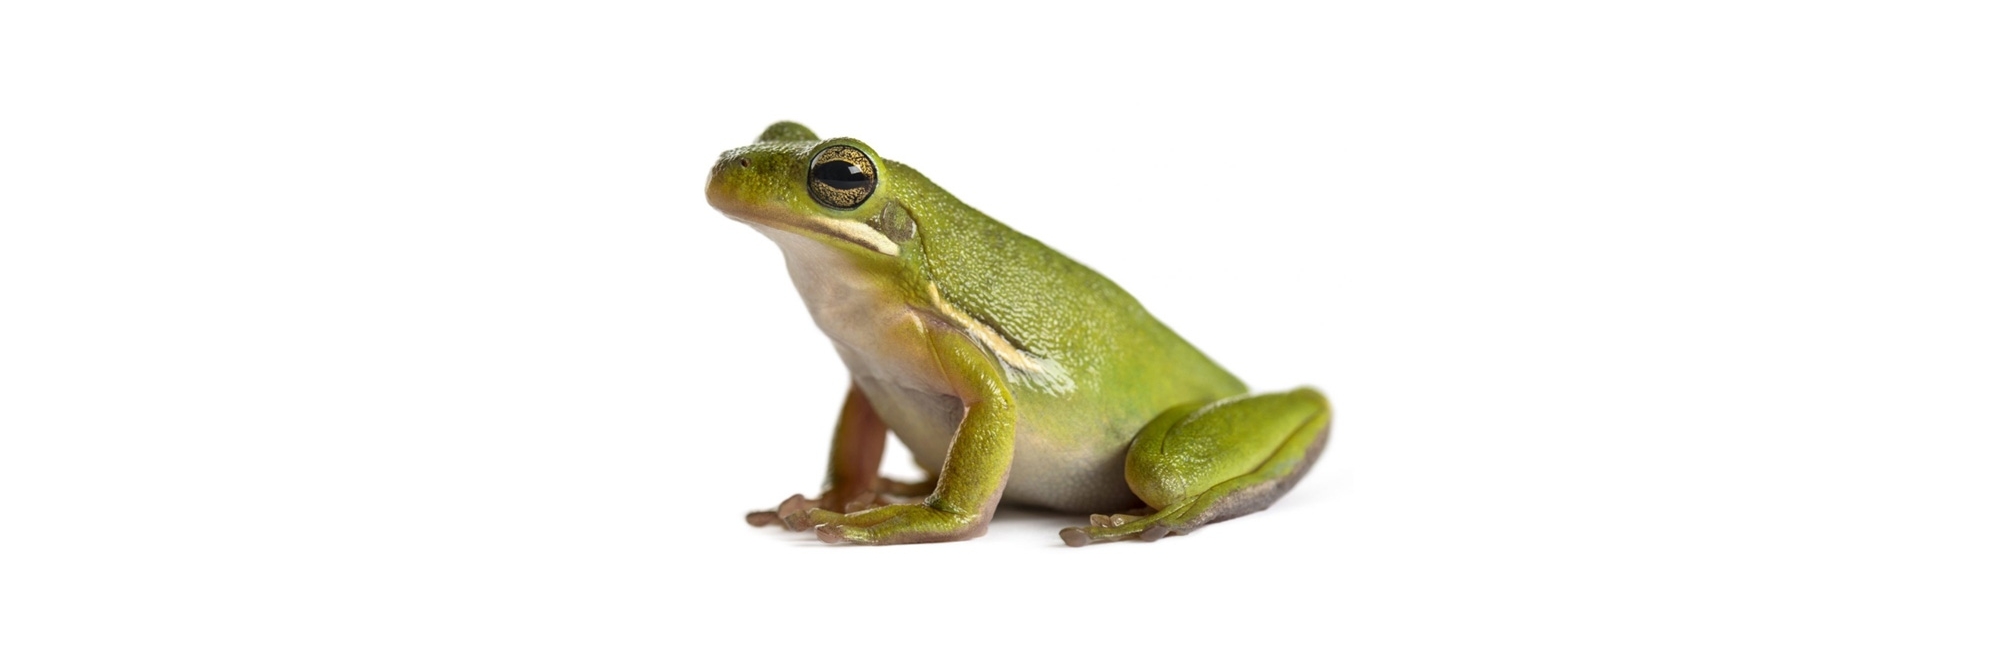 Is advertising like a boiling frog?